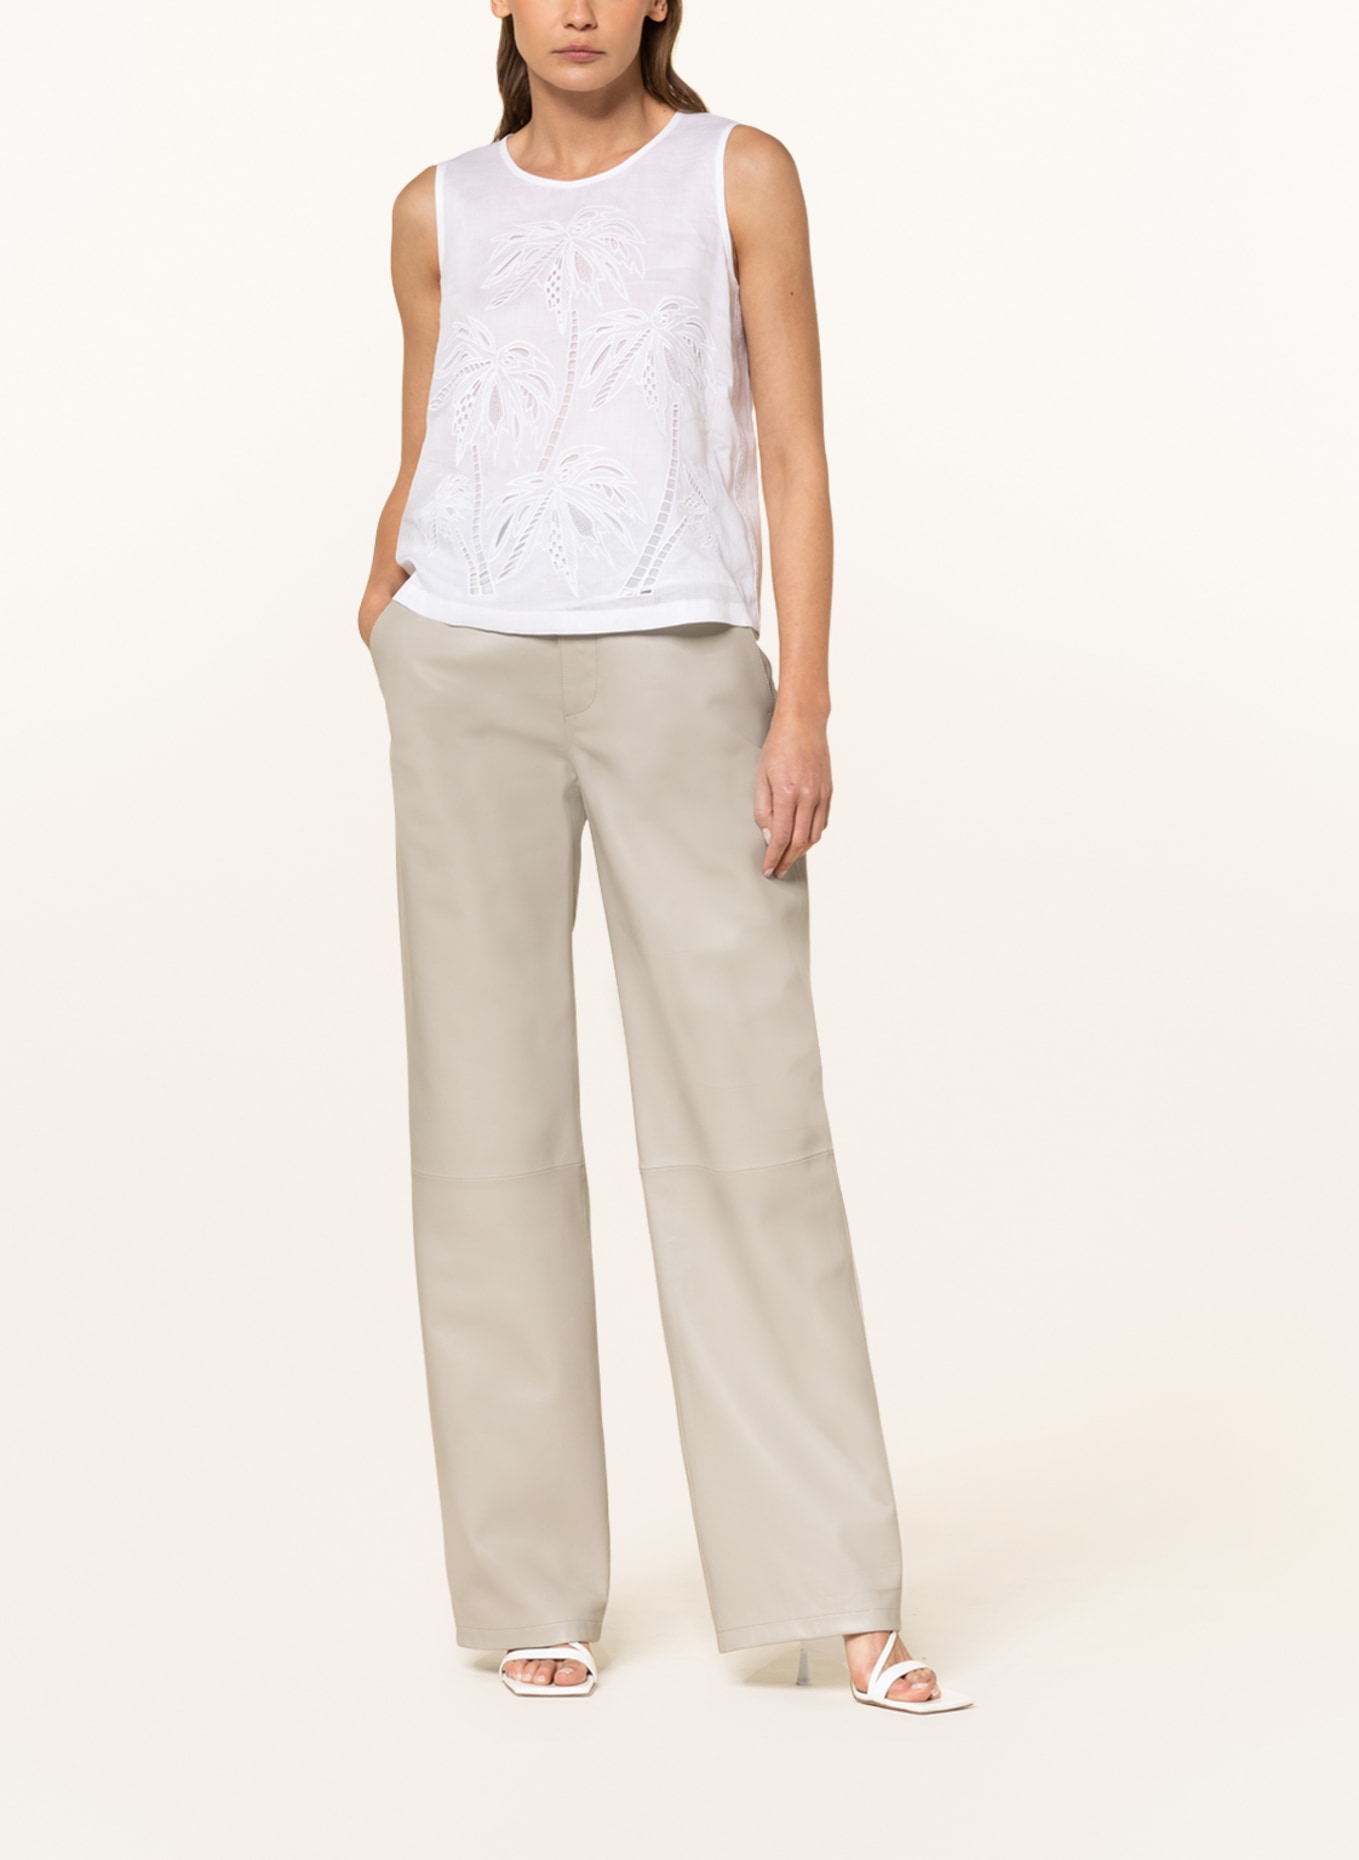 MaxMara STUDIO Blouse top GIOSTRA with broderie anglaise, Color: WHITE (Image 2)